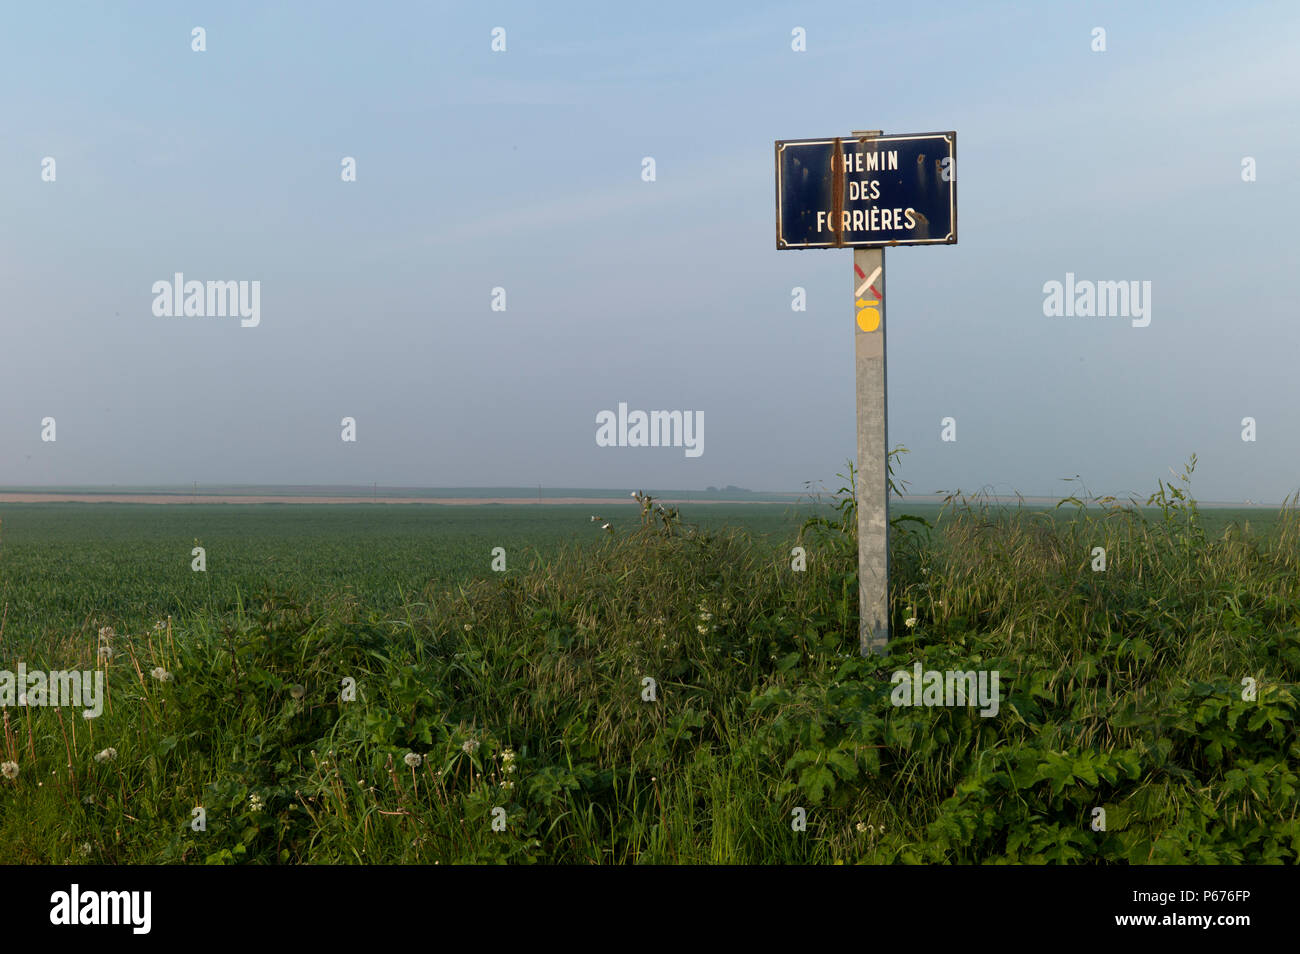 Rusty road sign in field, Normandy, France Stock Photo